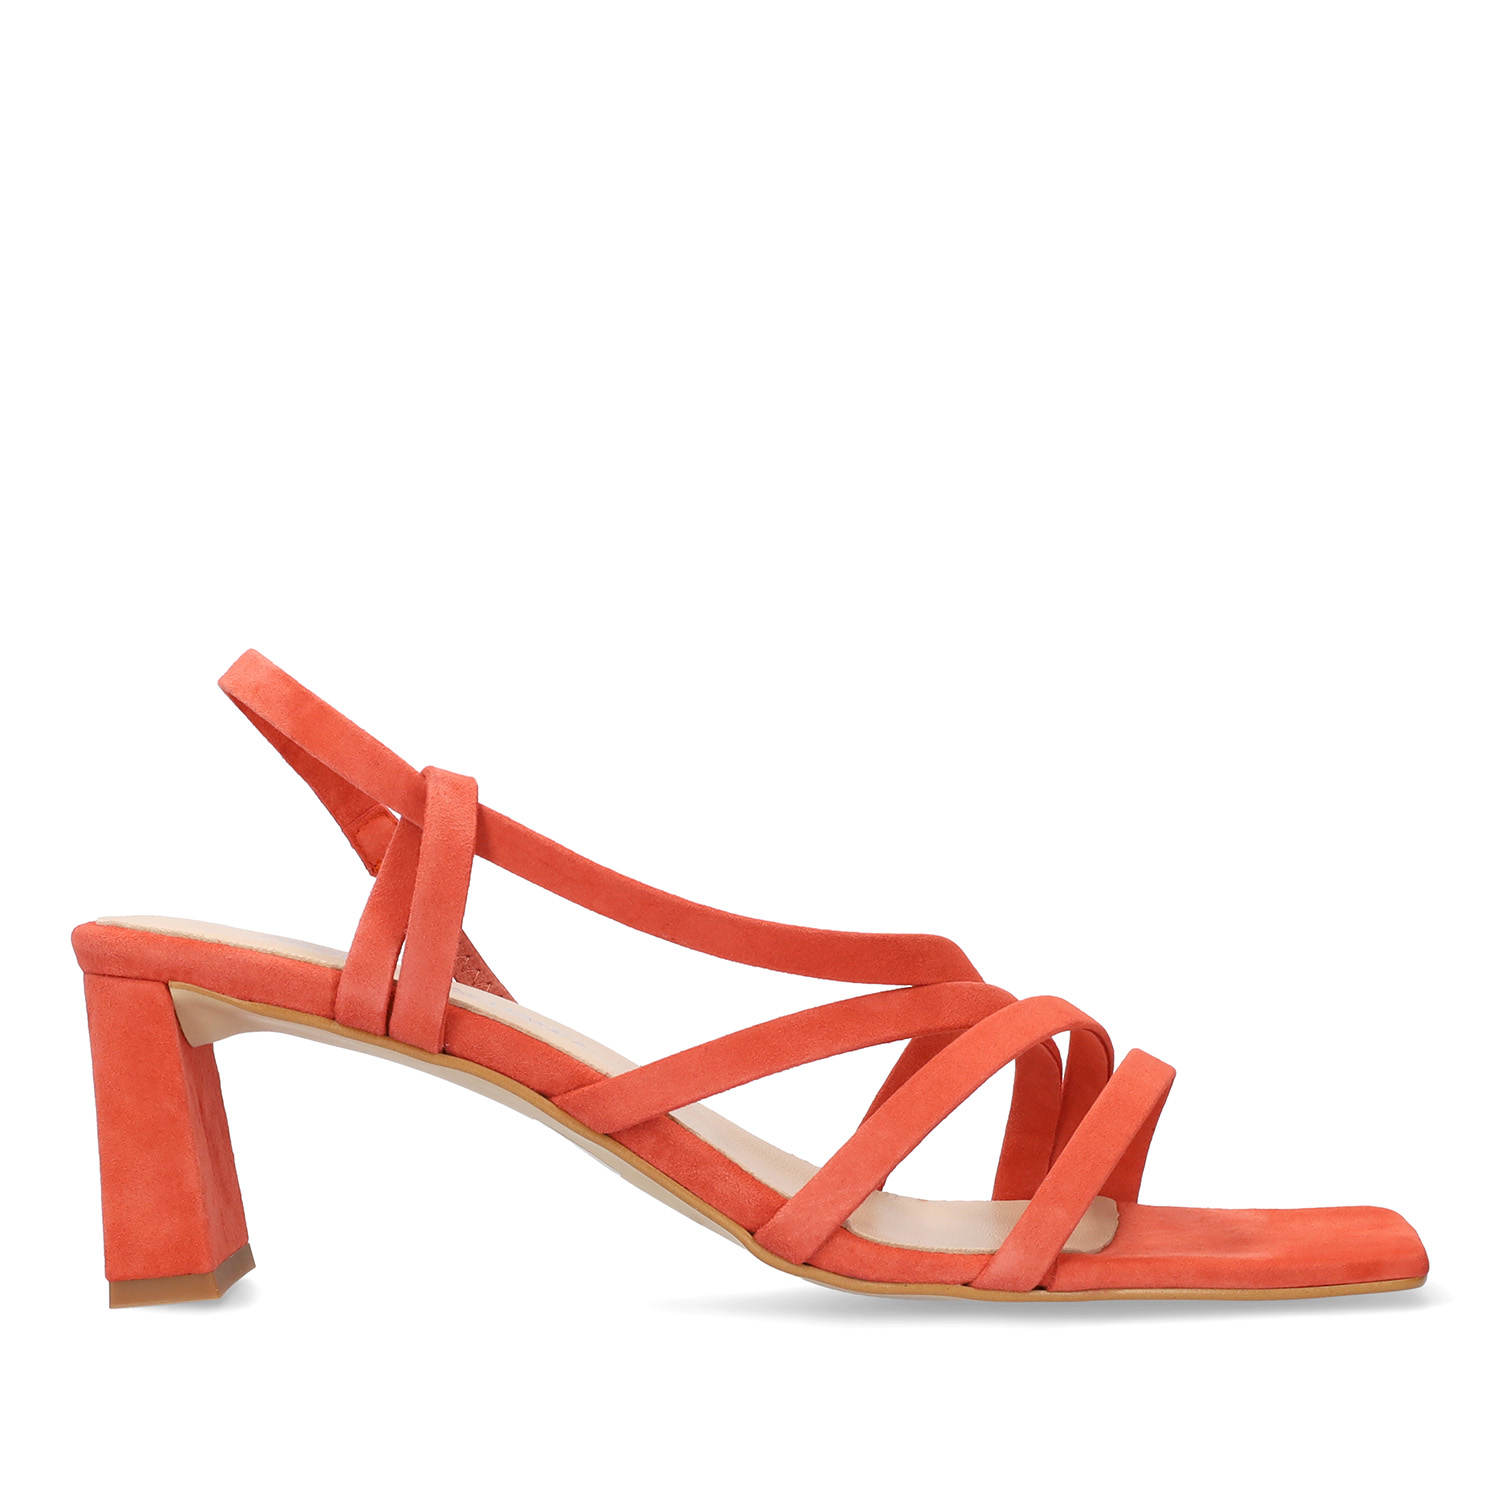 Strapped Sandals in Brick-Red Split Leather and Square Toe